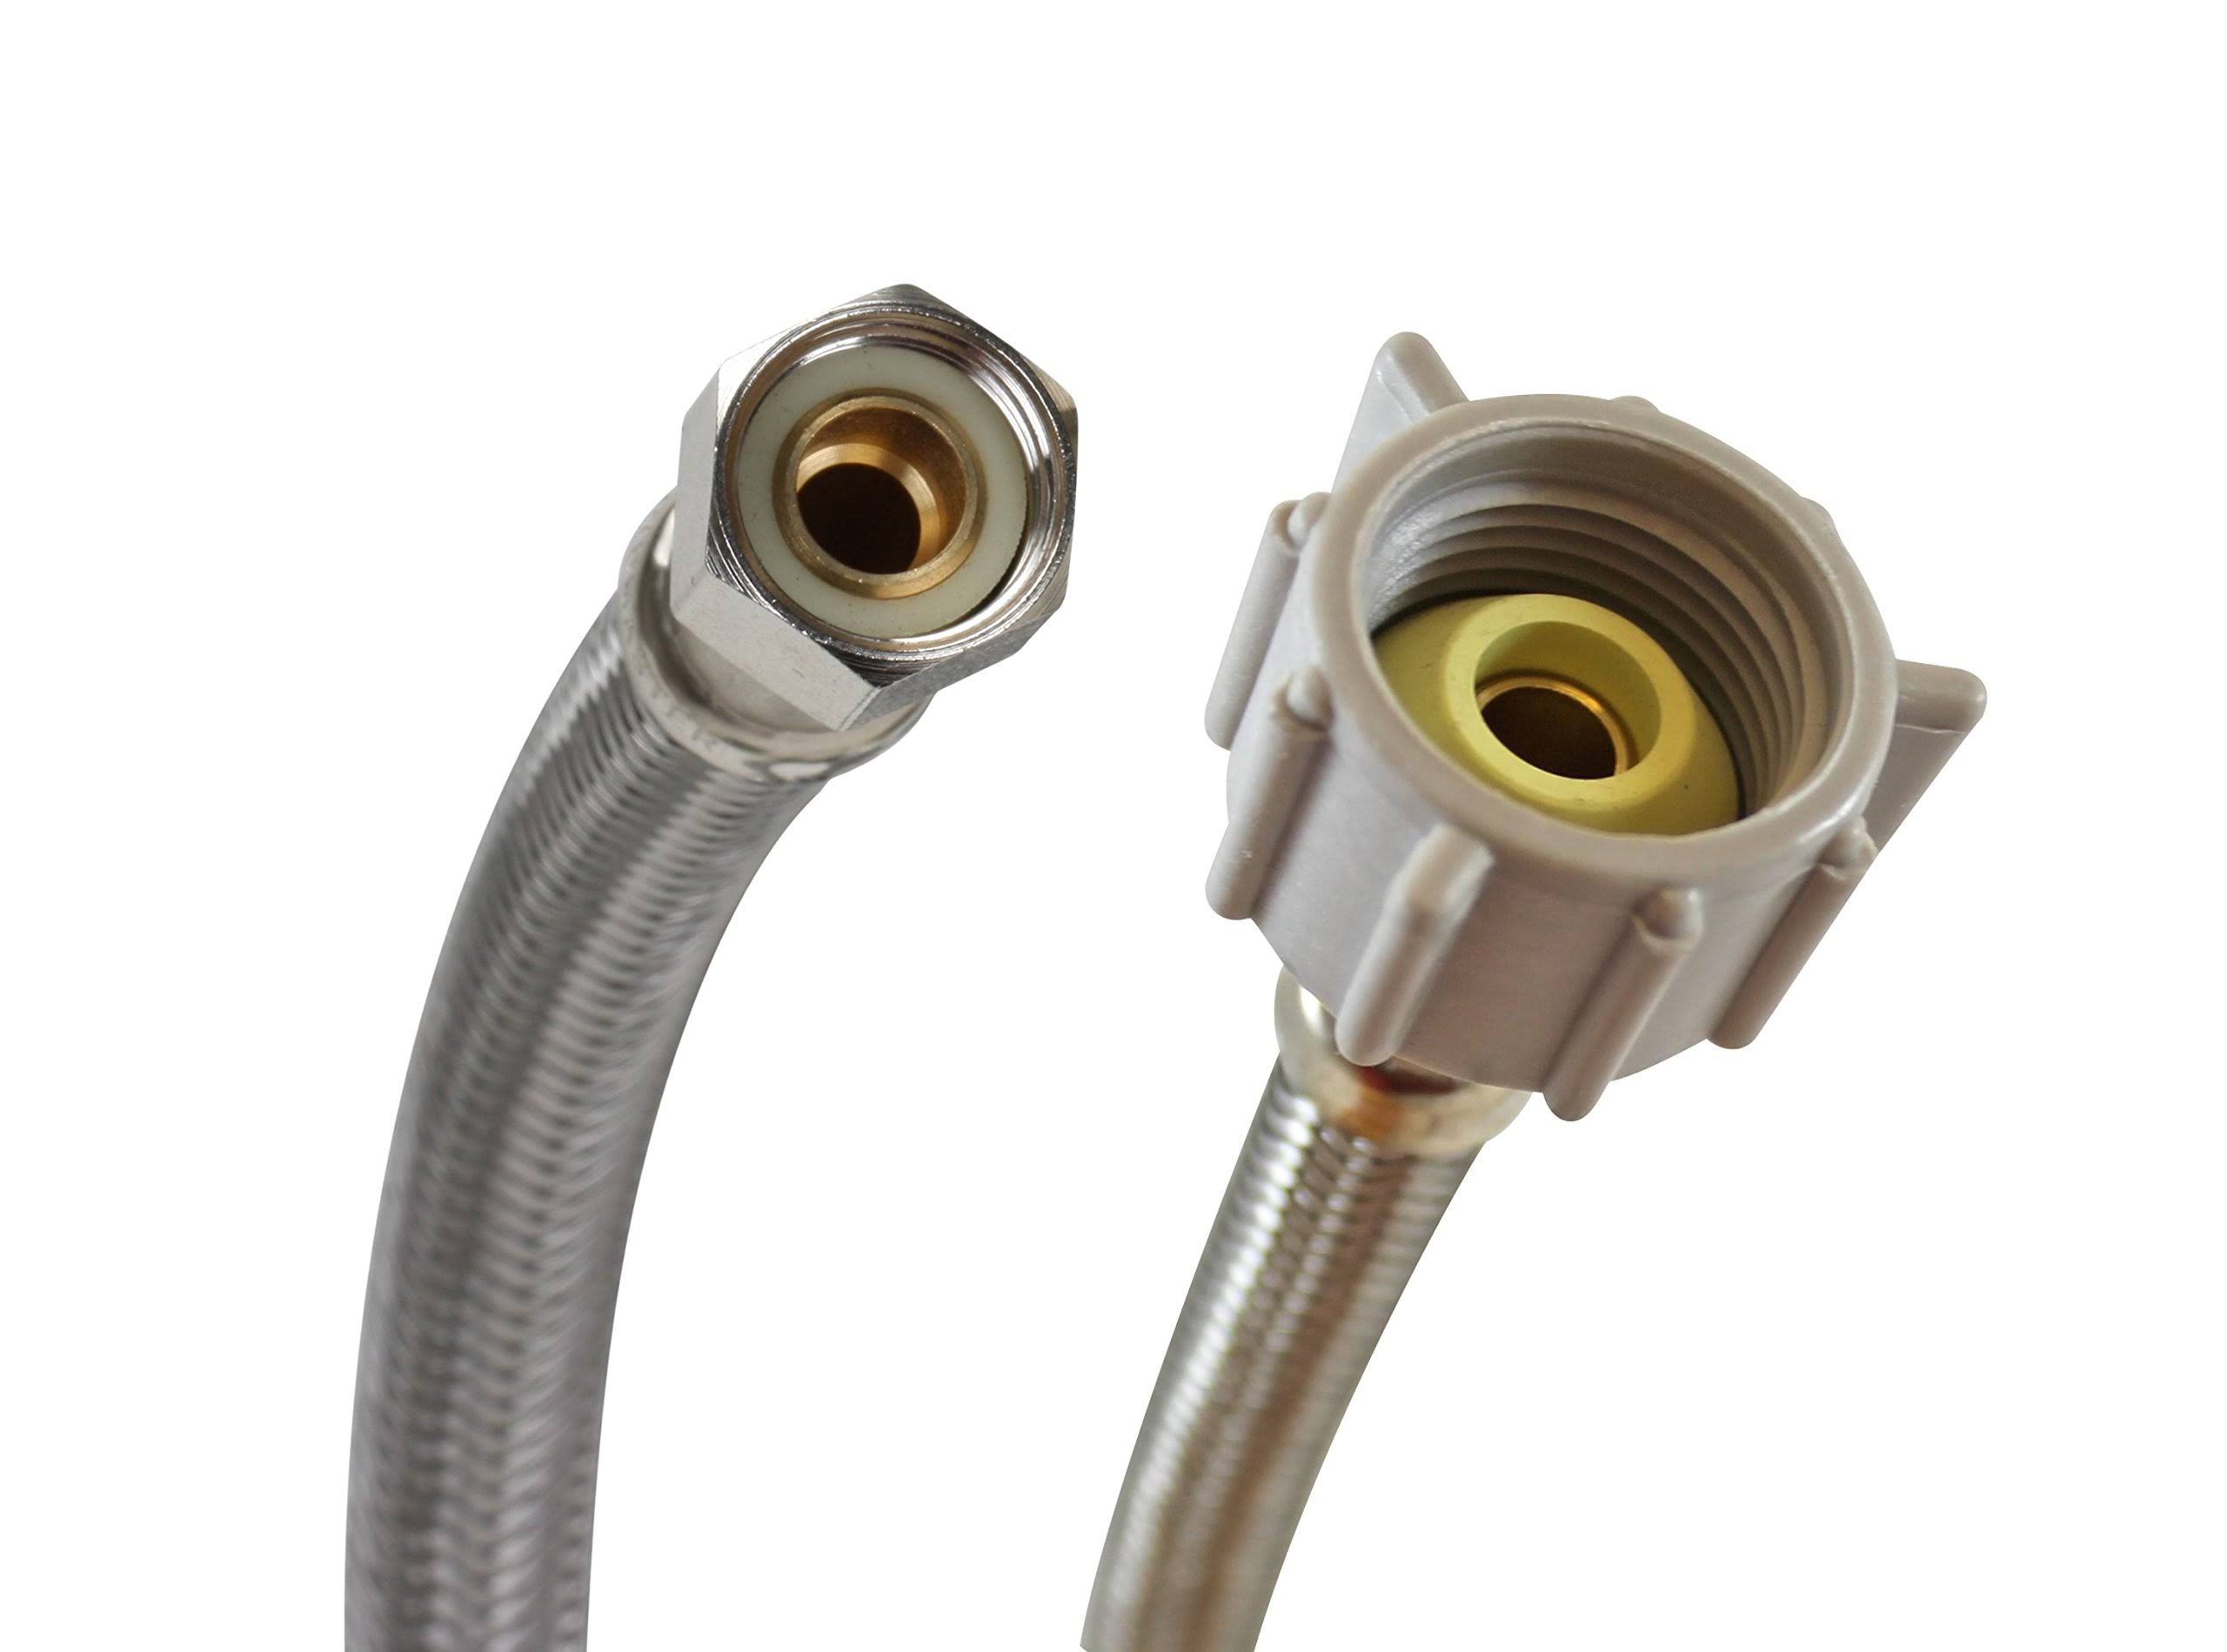 Fluidmaster Braided Stainless Steel Toilet Connectors - 3/8" x 7/8" x 12"